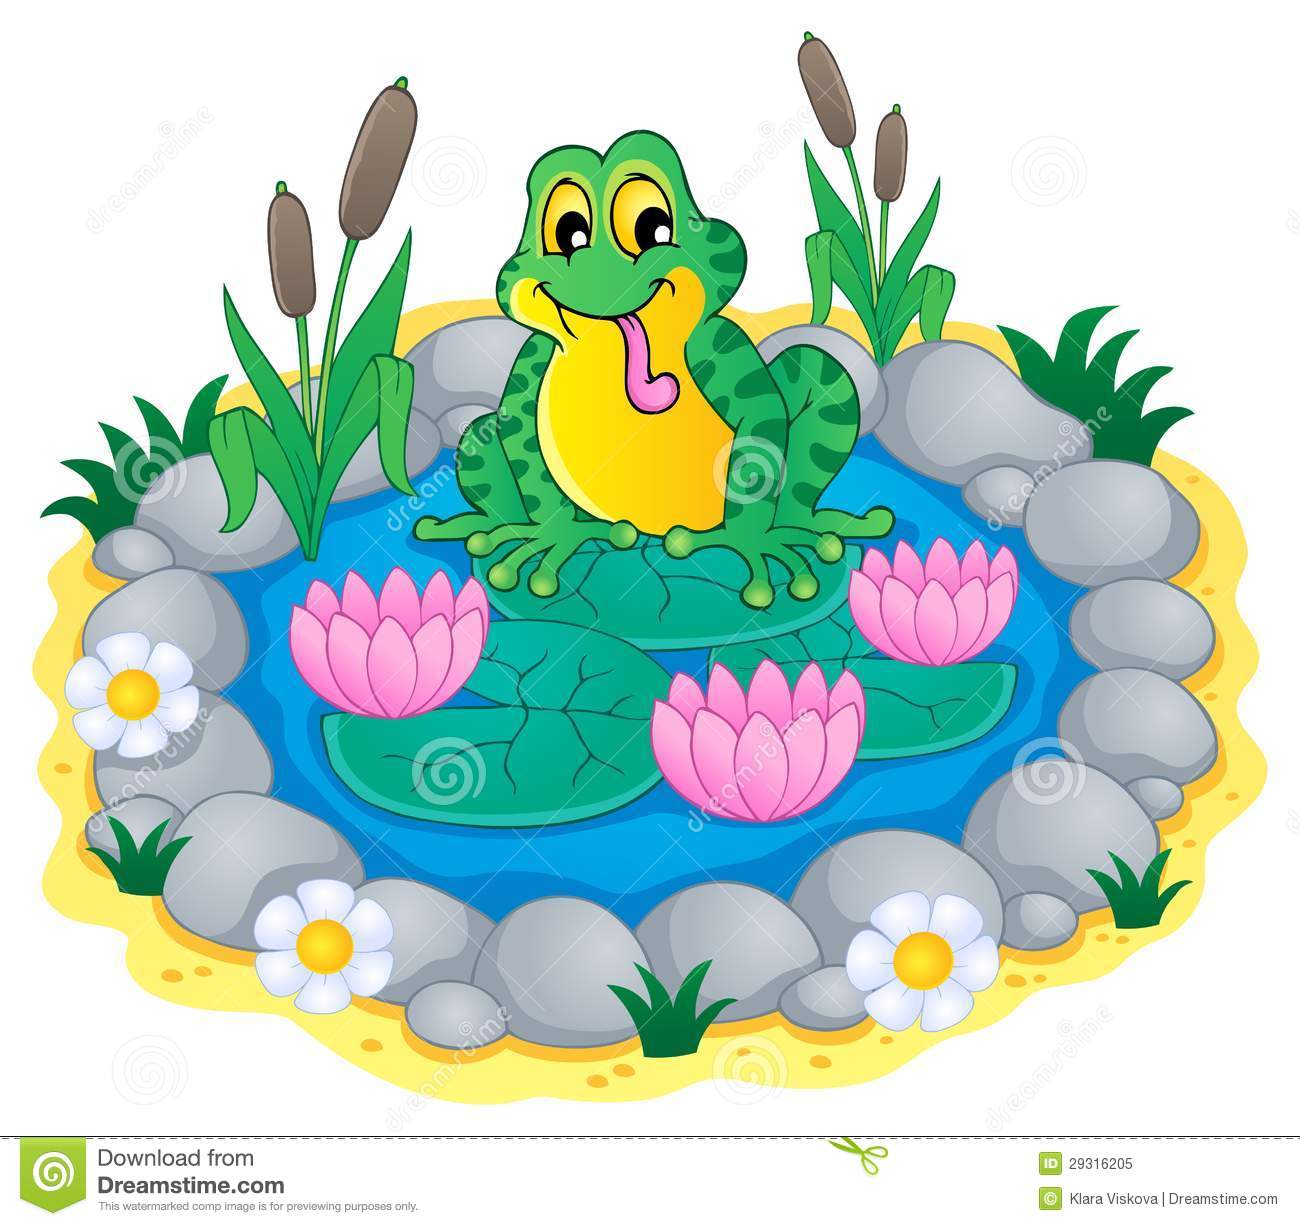 Displaying 18  Images For   Pond Ecosystem Clipart   